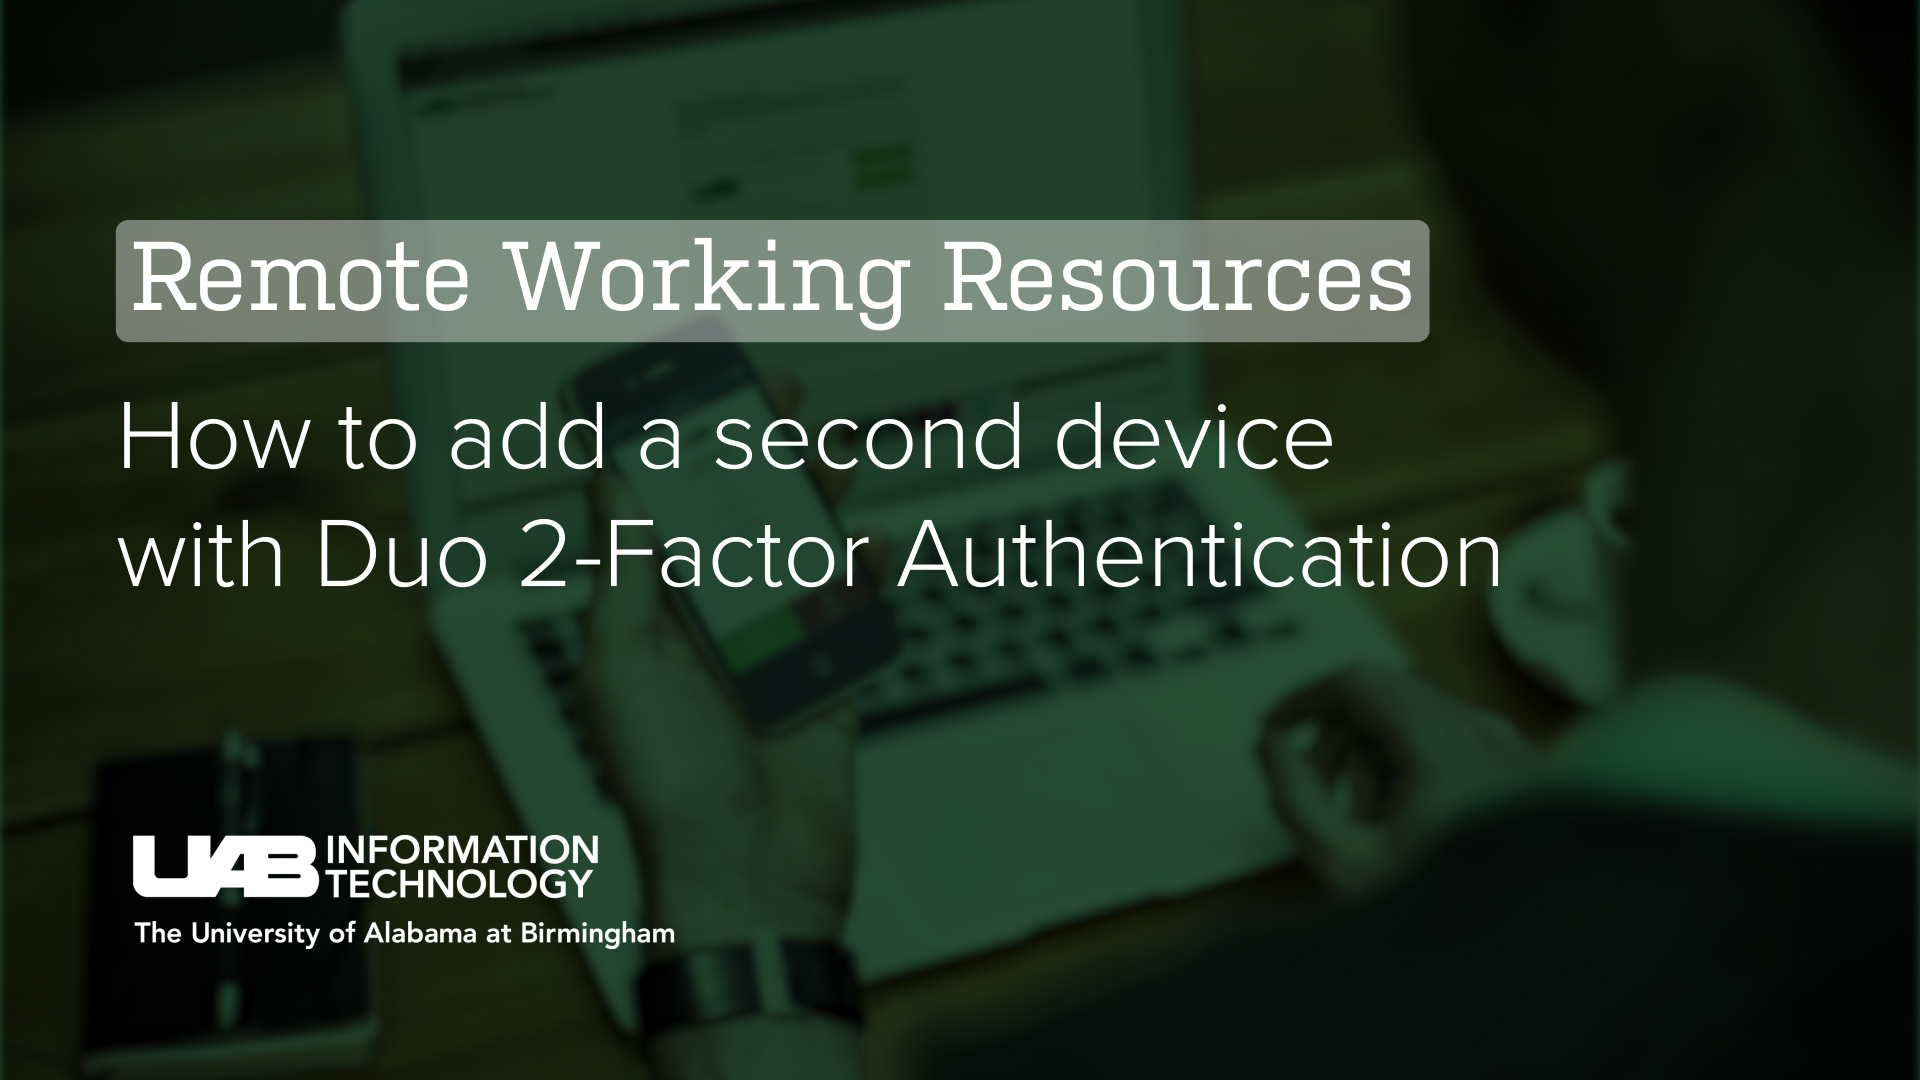 How to add a second device with Duo 2-Factor Authentication